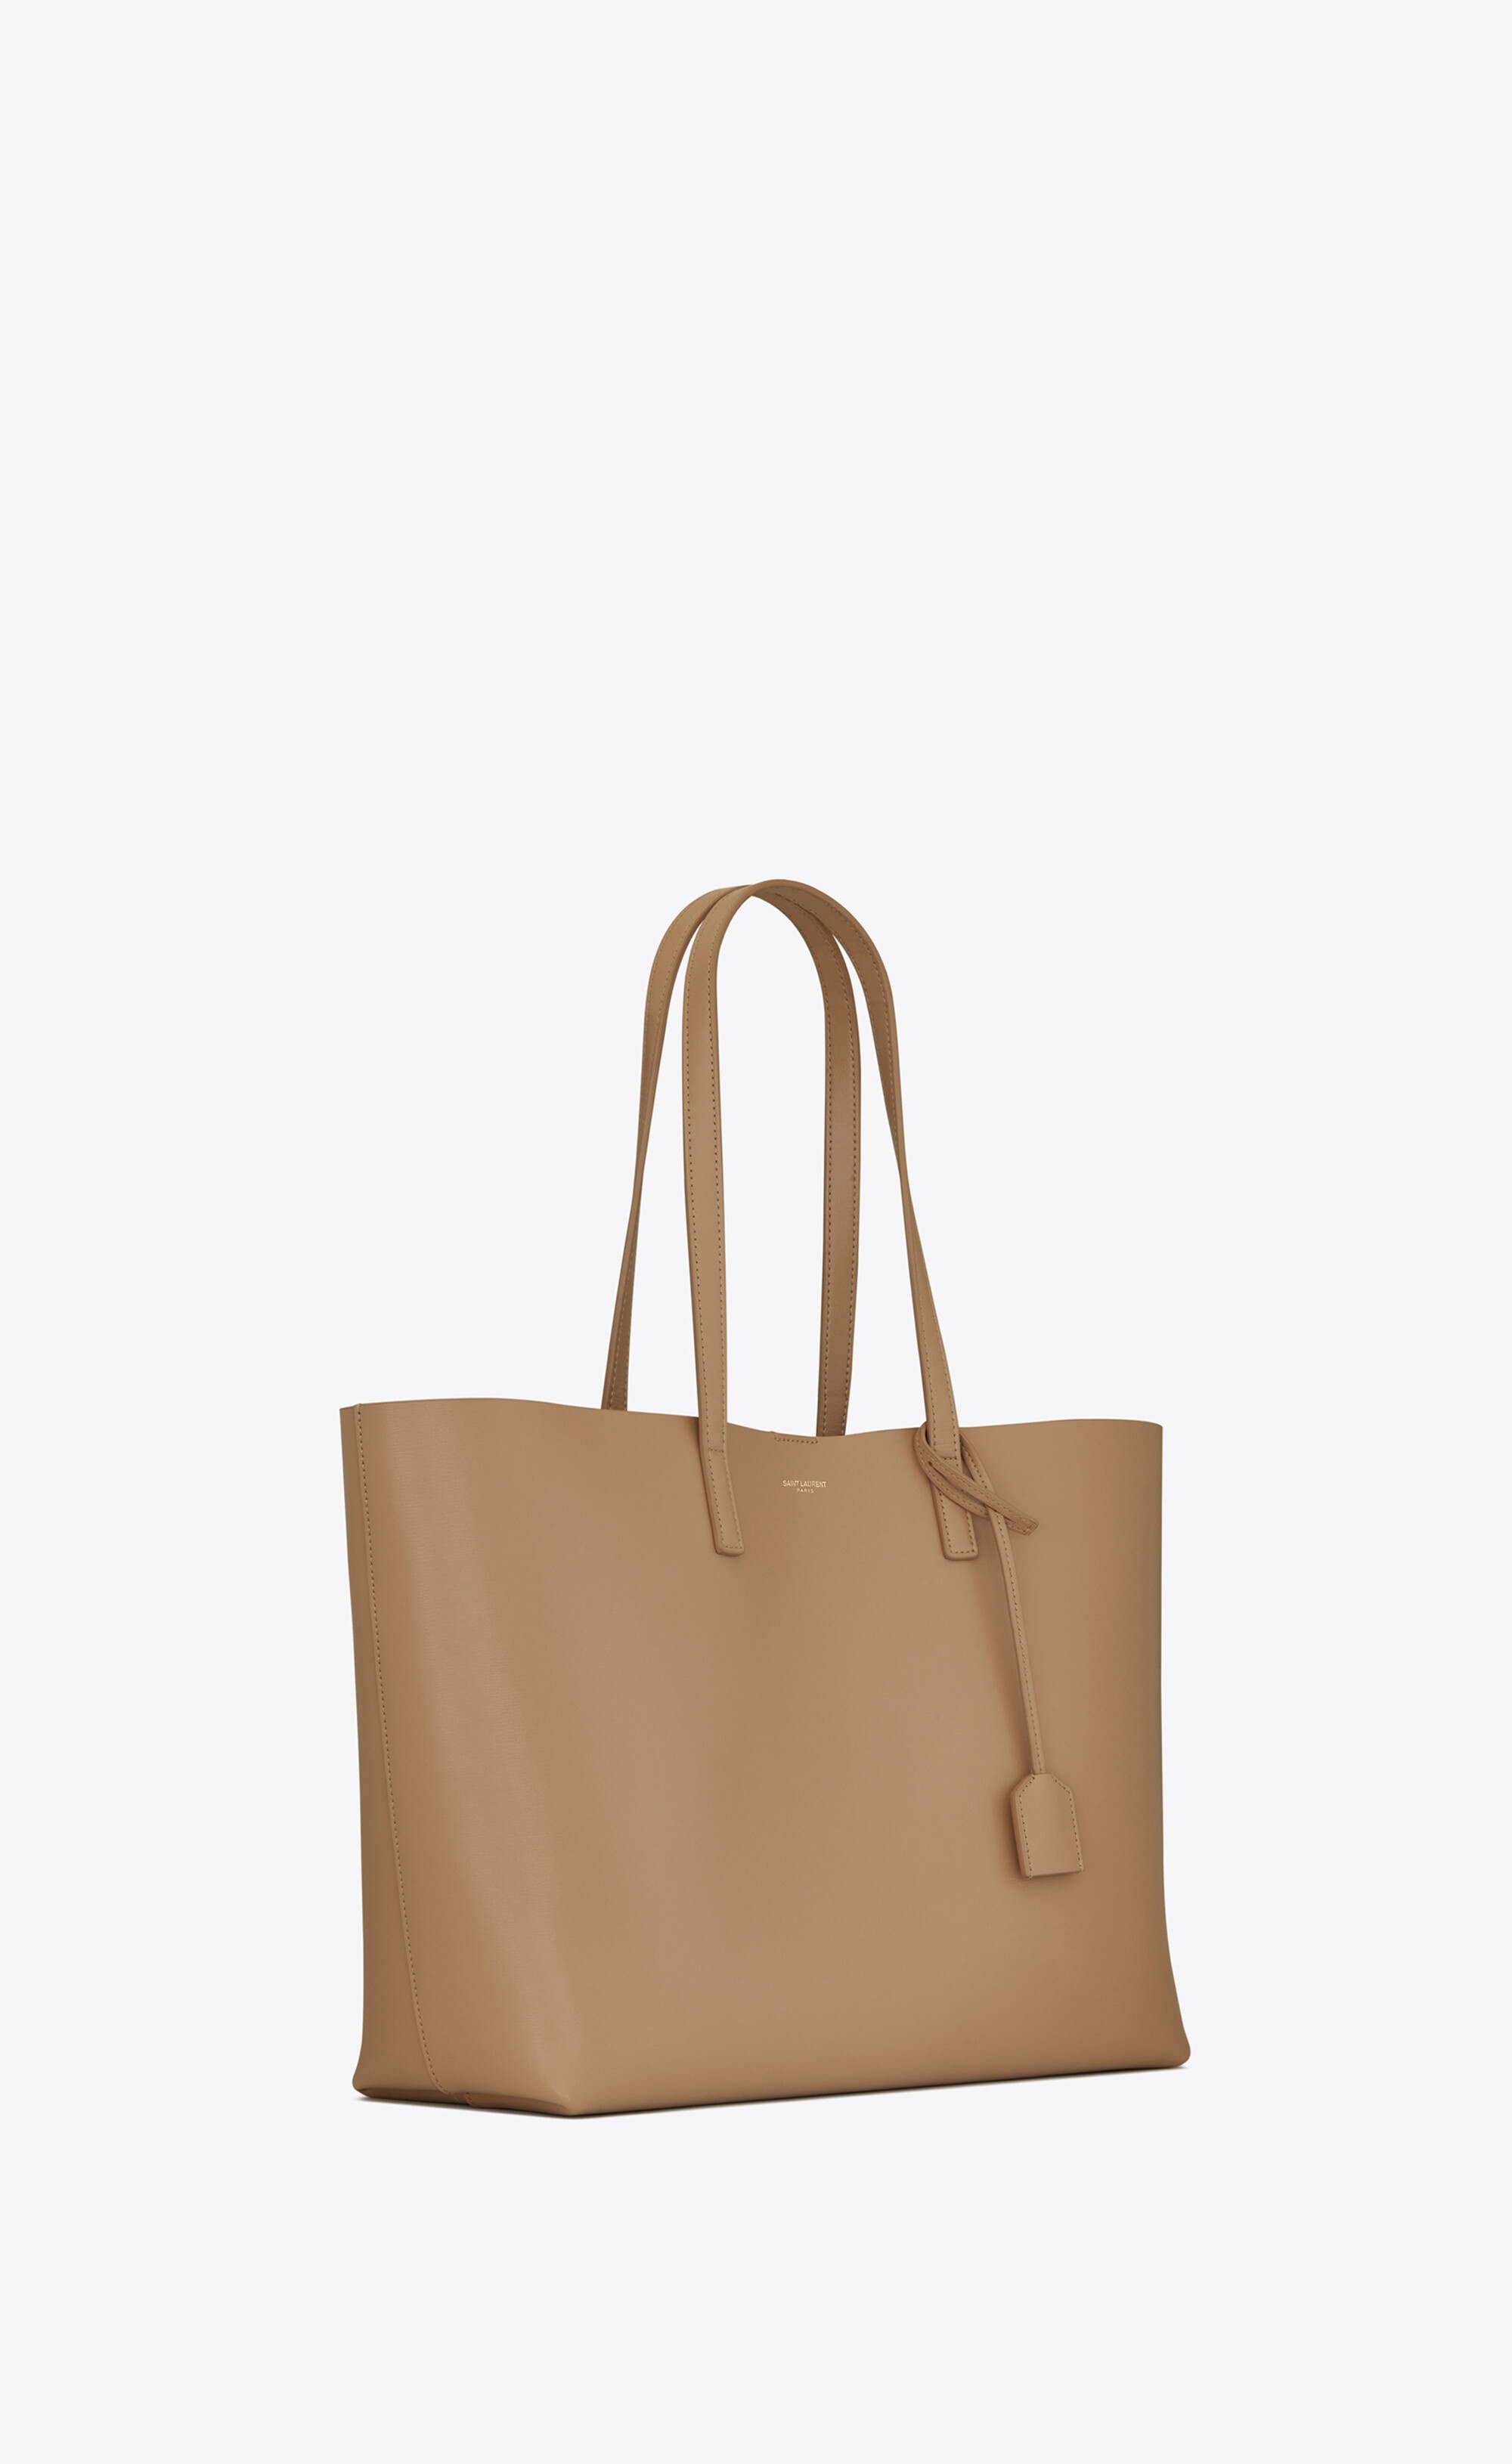 shopping bag saint laurent e/w in supple leather - 6